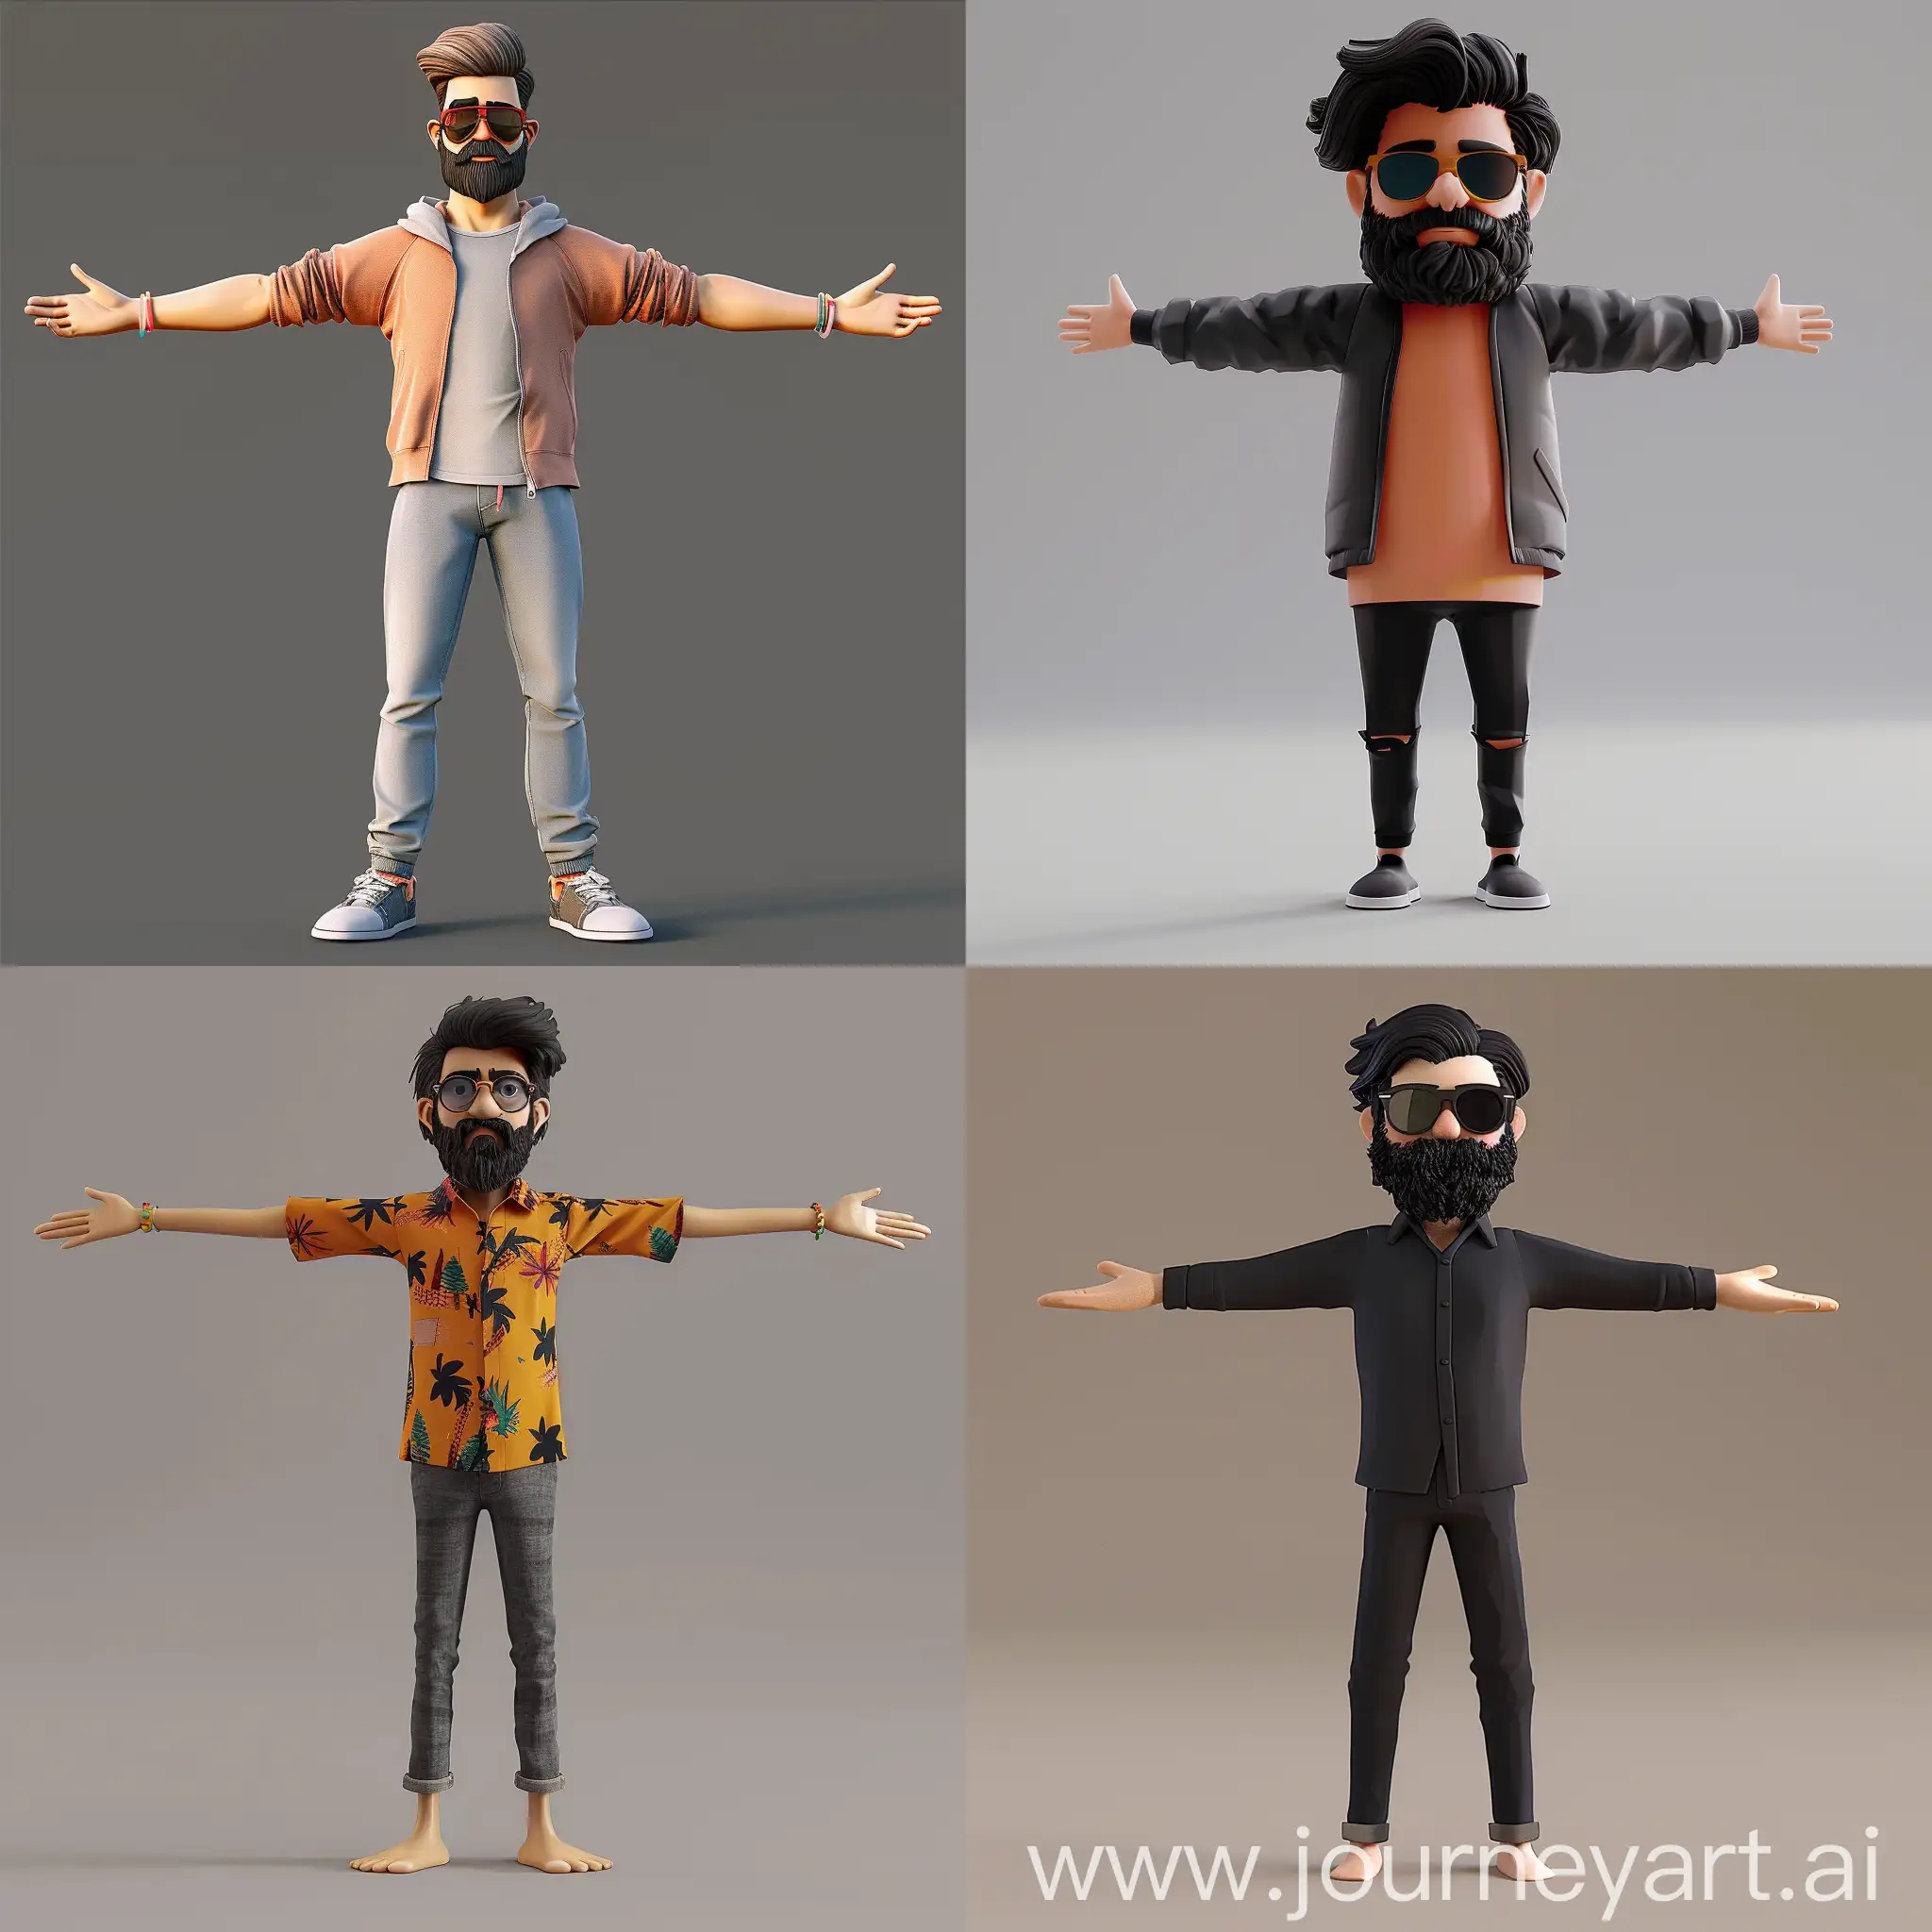 3D-Character-Model-of-a-Man-in-TPose-with-Sunglasses-and-Beard